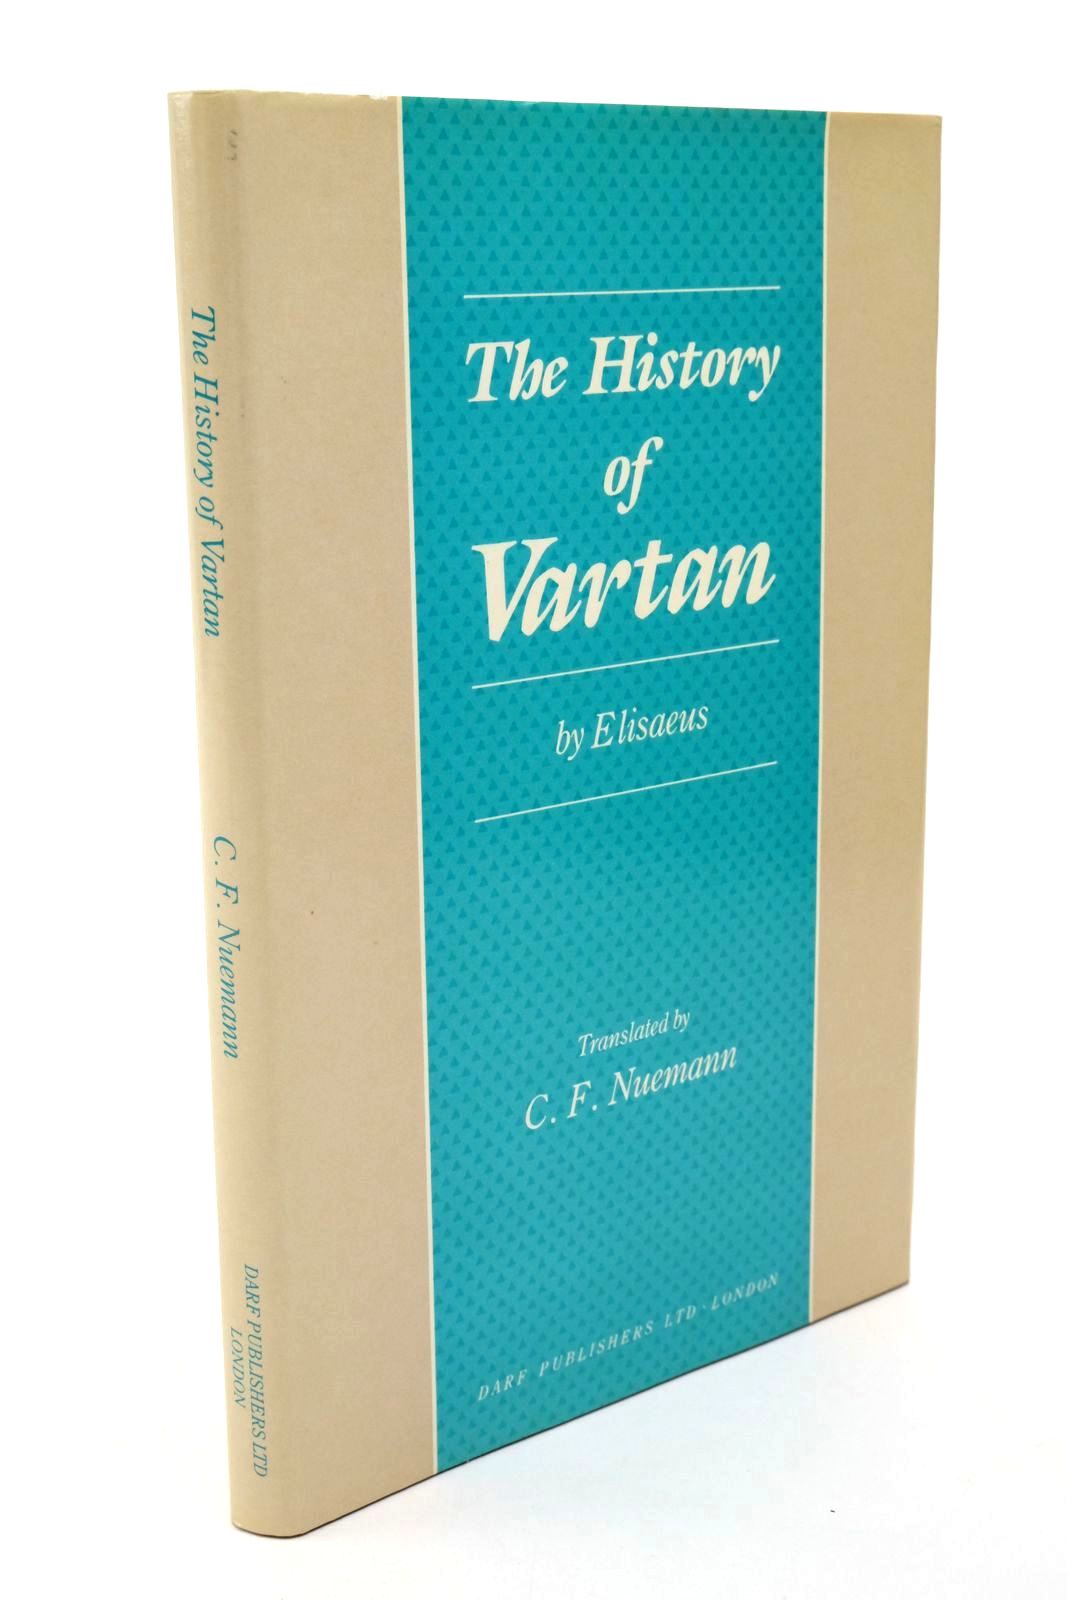 Photo of THE HISTORY OF VARTAN, AND OF THE BATTLE OF THE ARMENIANS- Stock Number: 1322539